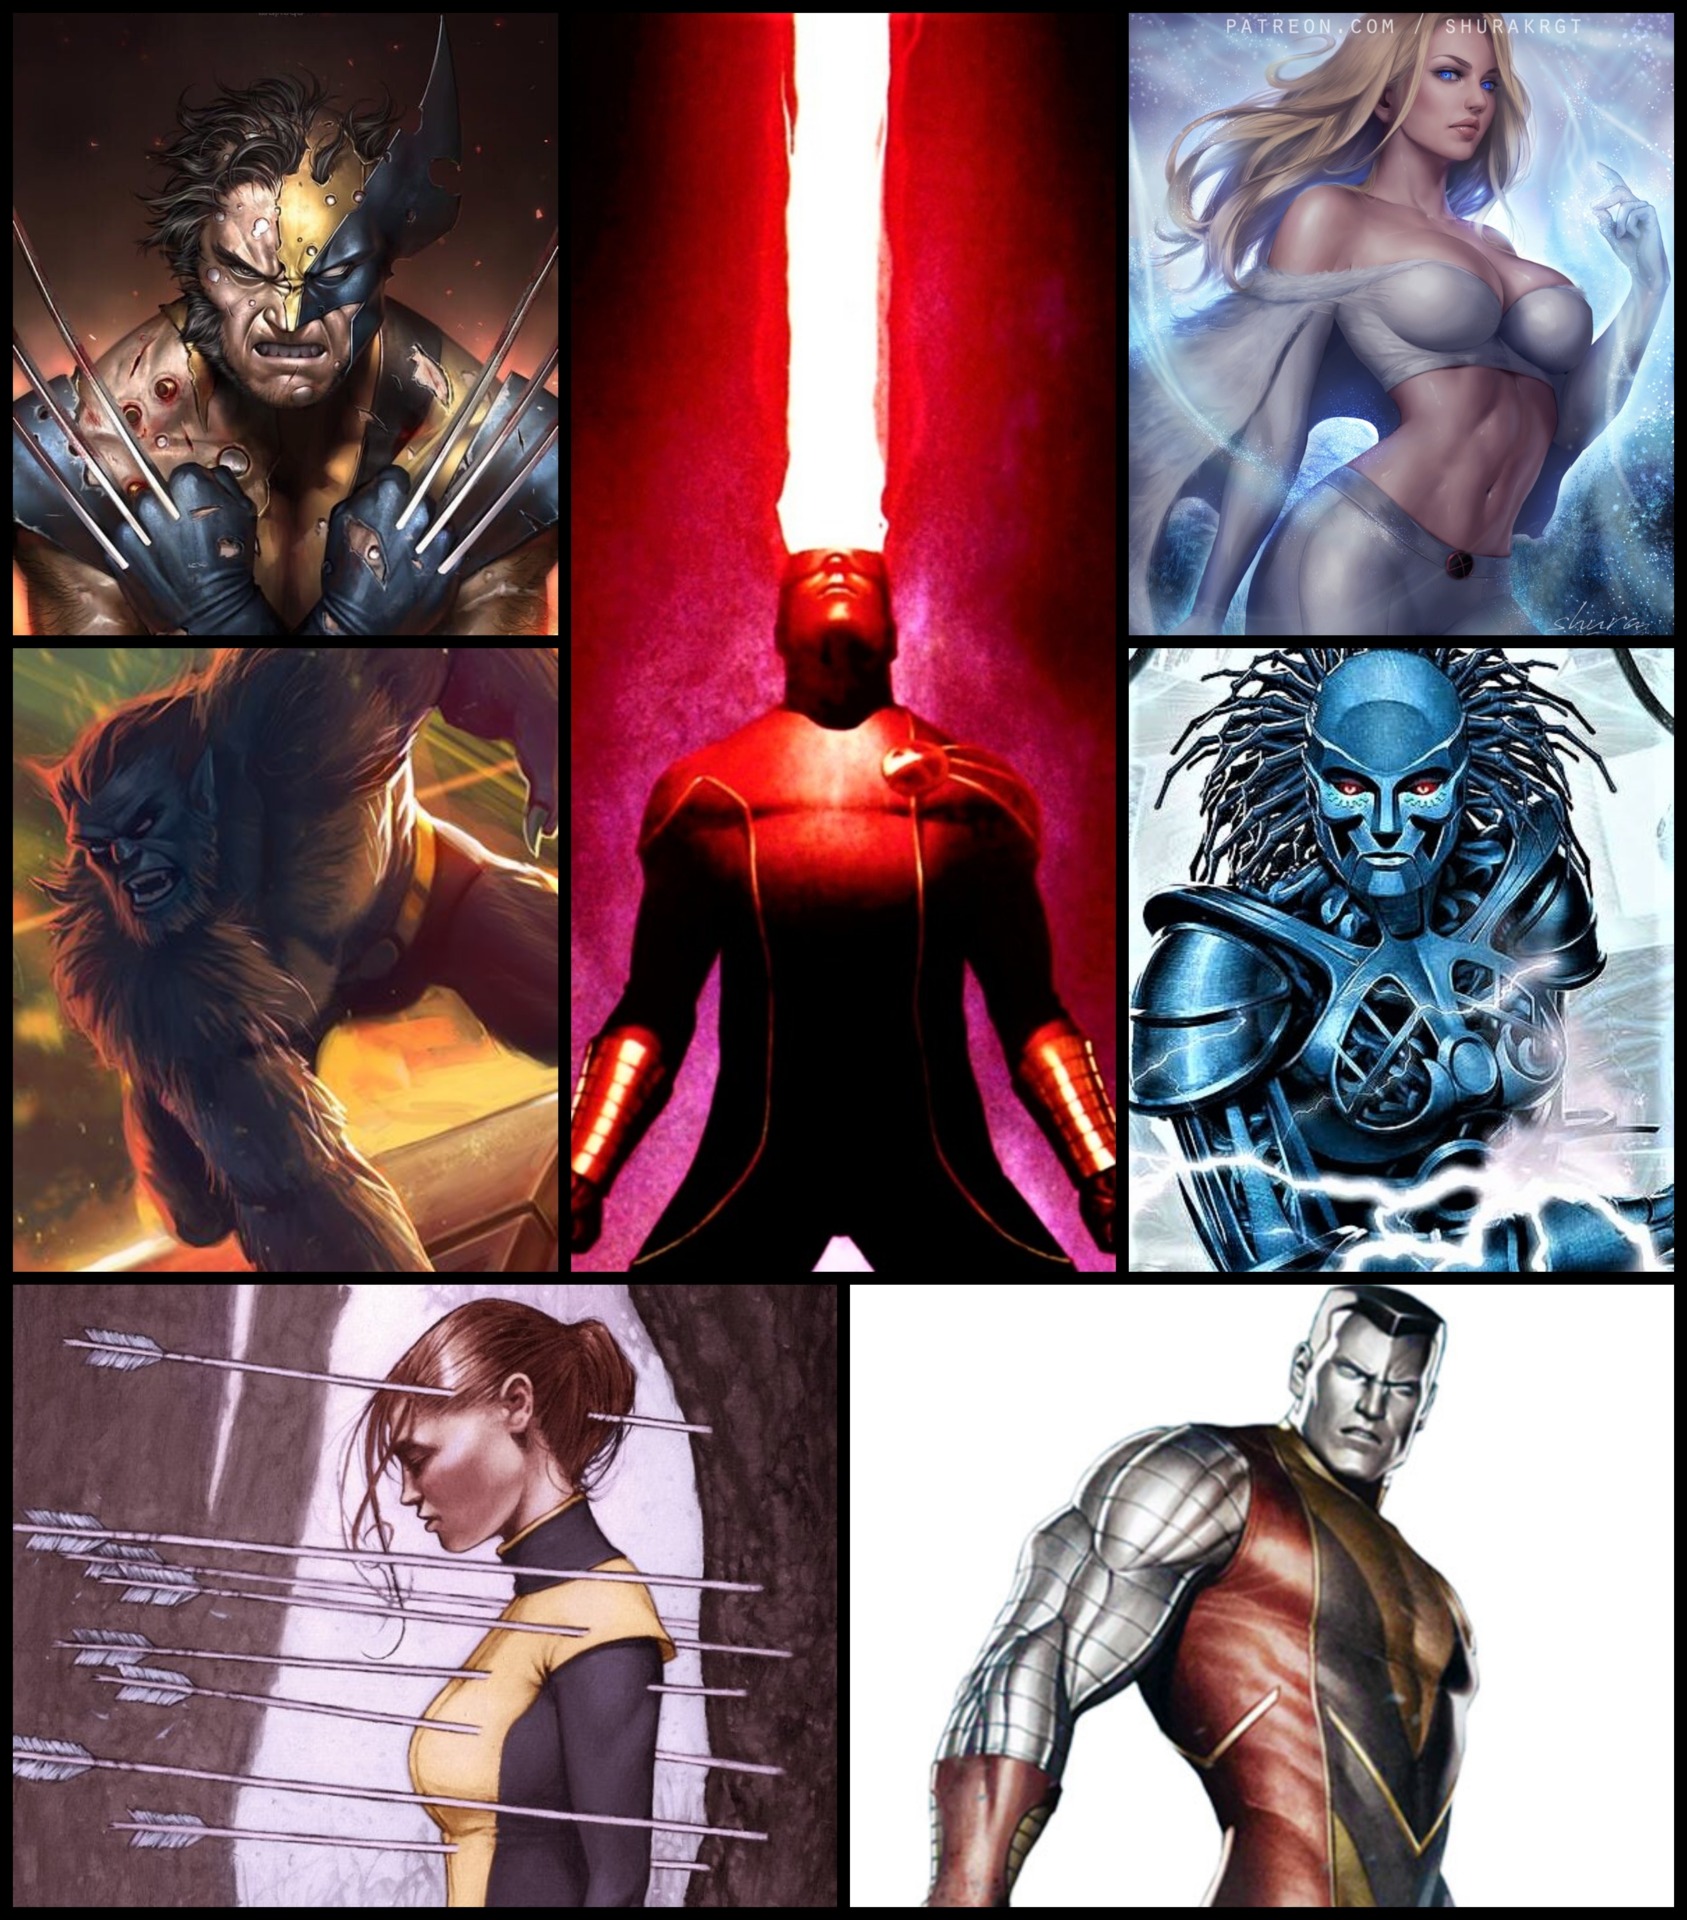 Cyclops / Wolverine / Emma Frost / Beast / Kitty Pryde / Colossus / Danger